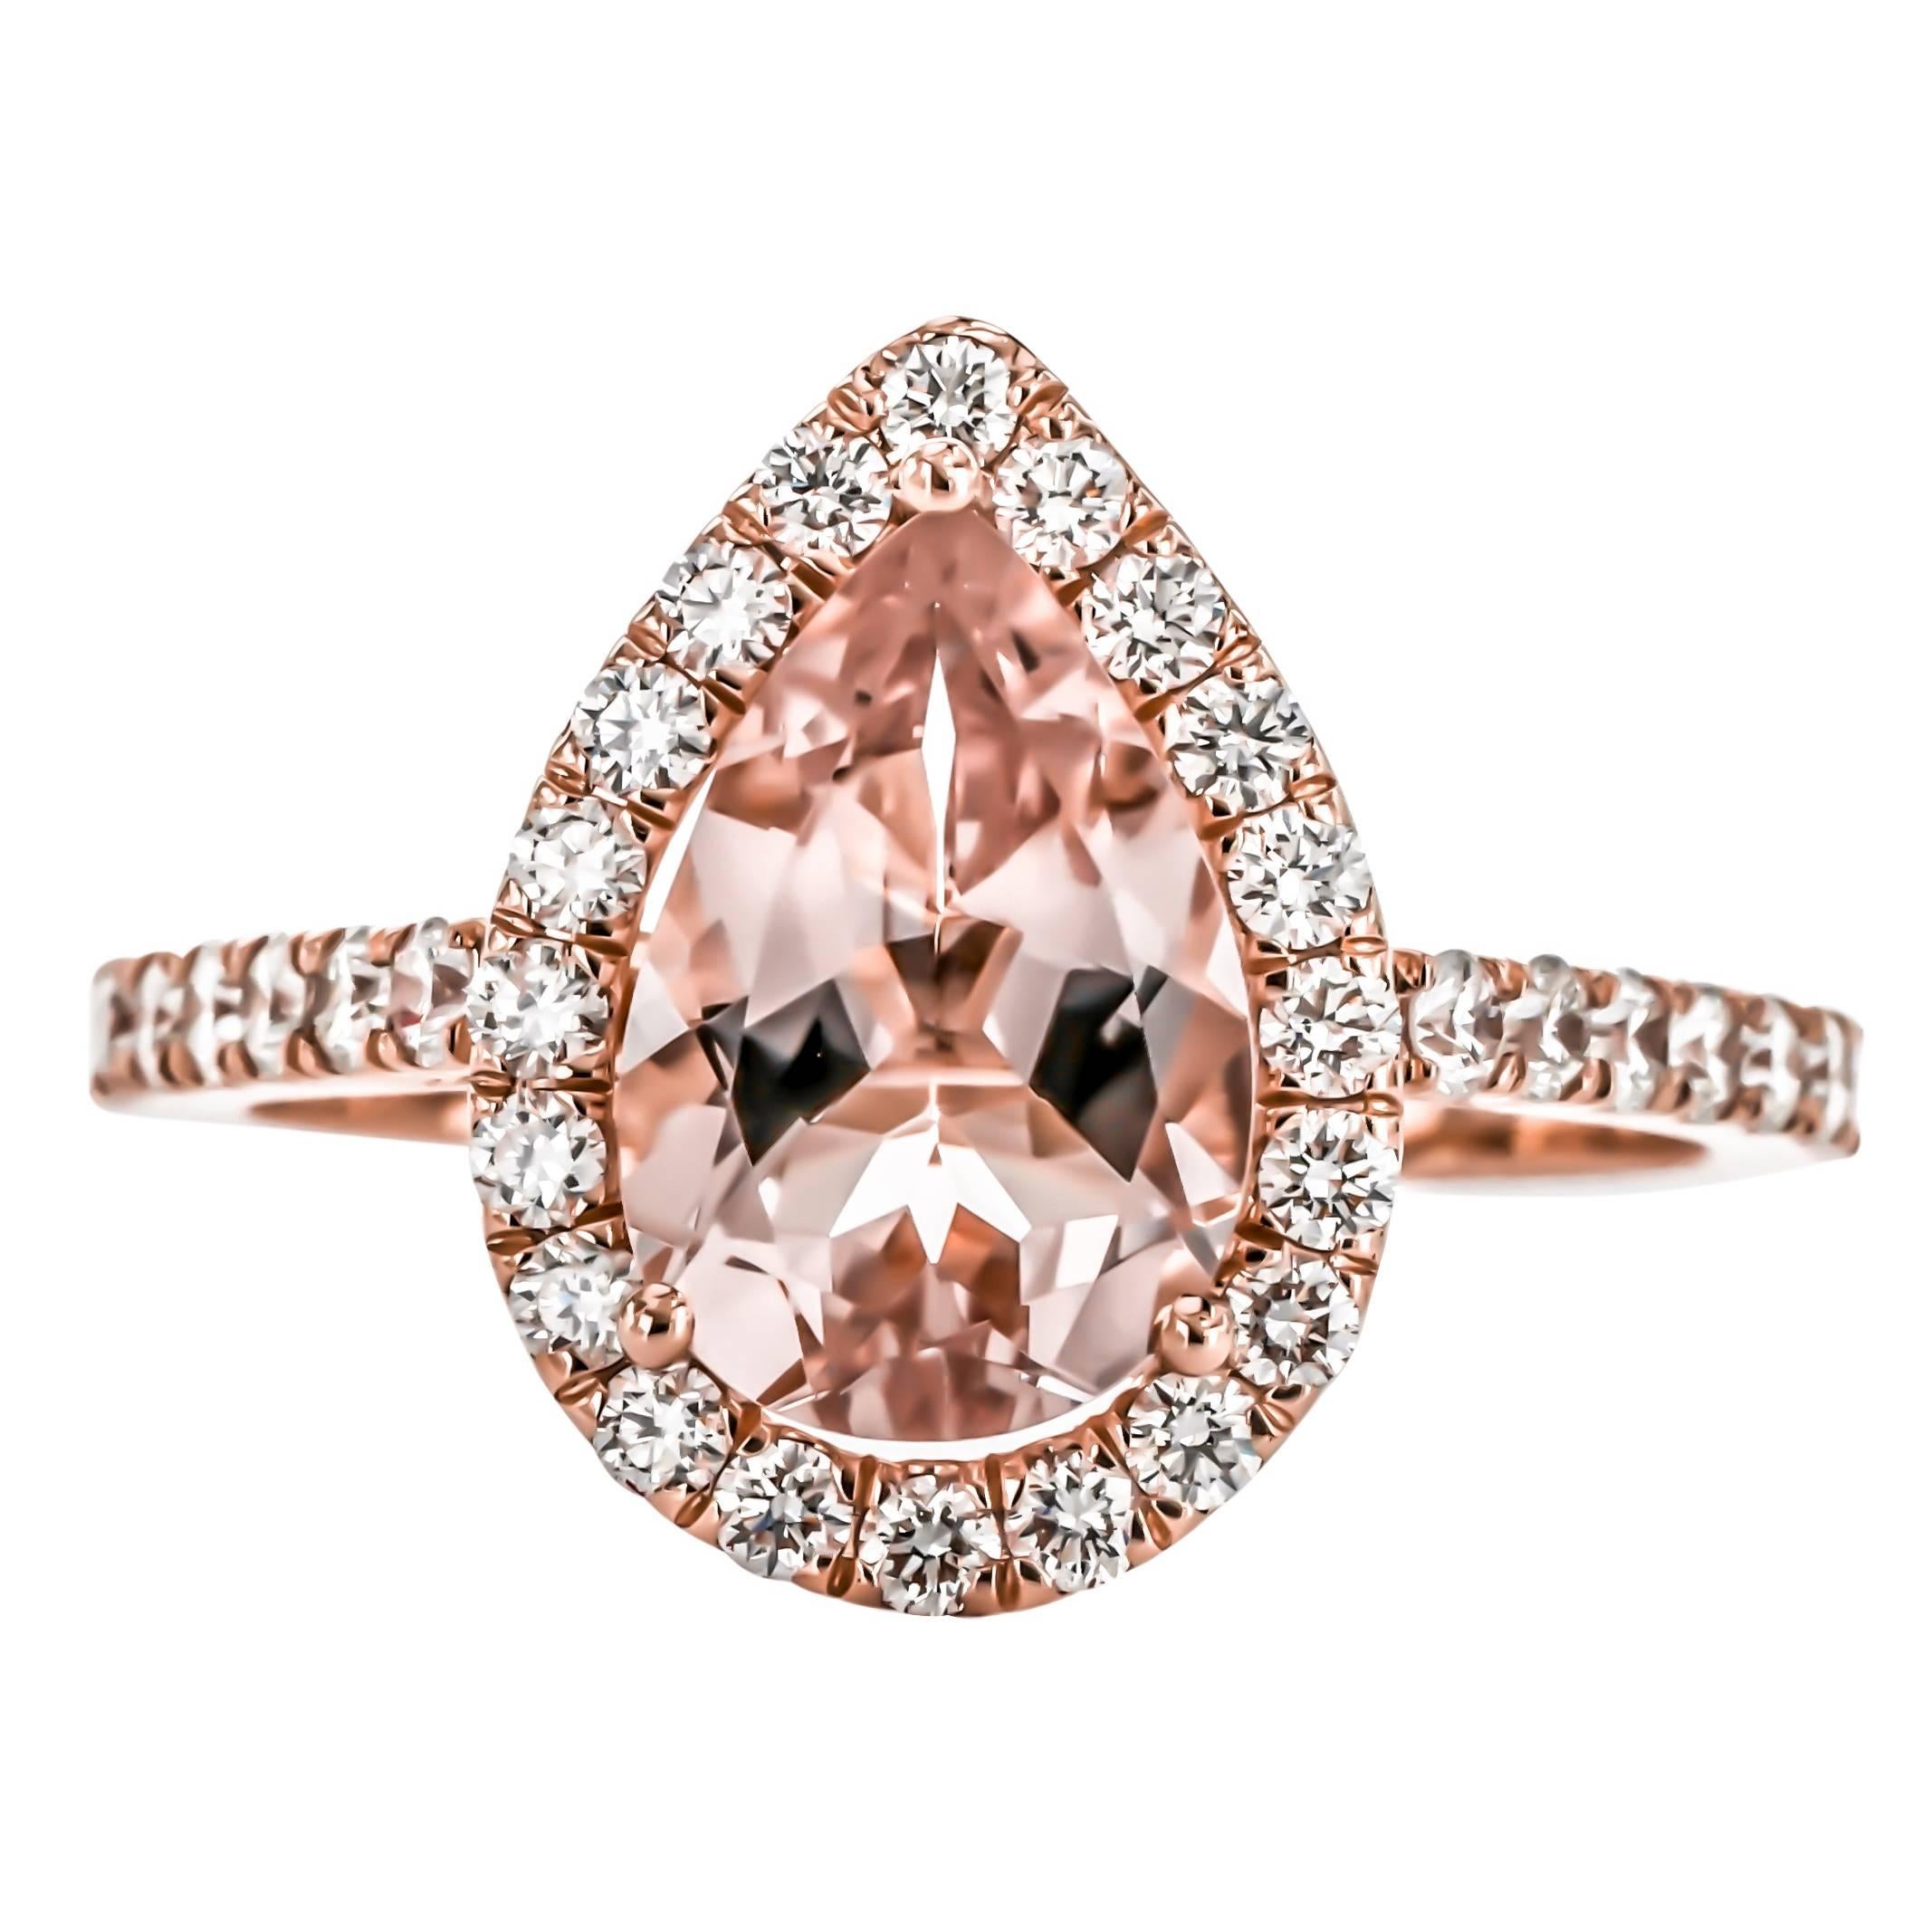 One of a Kind 1.95 Carat Morganite Diamond Gold Ring